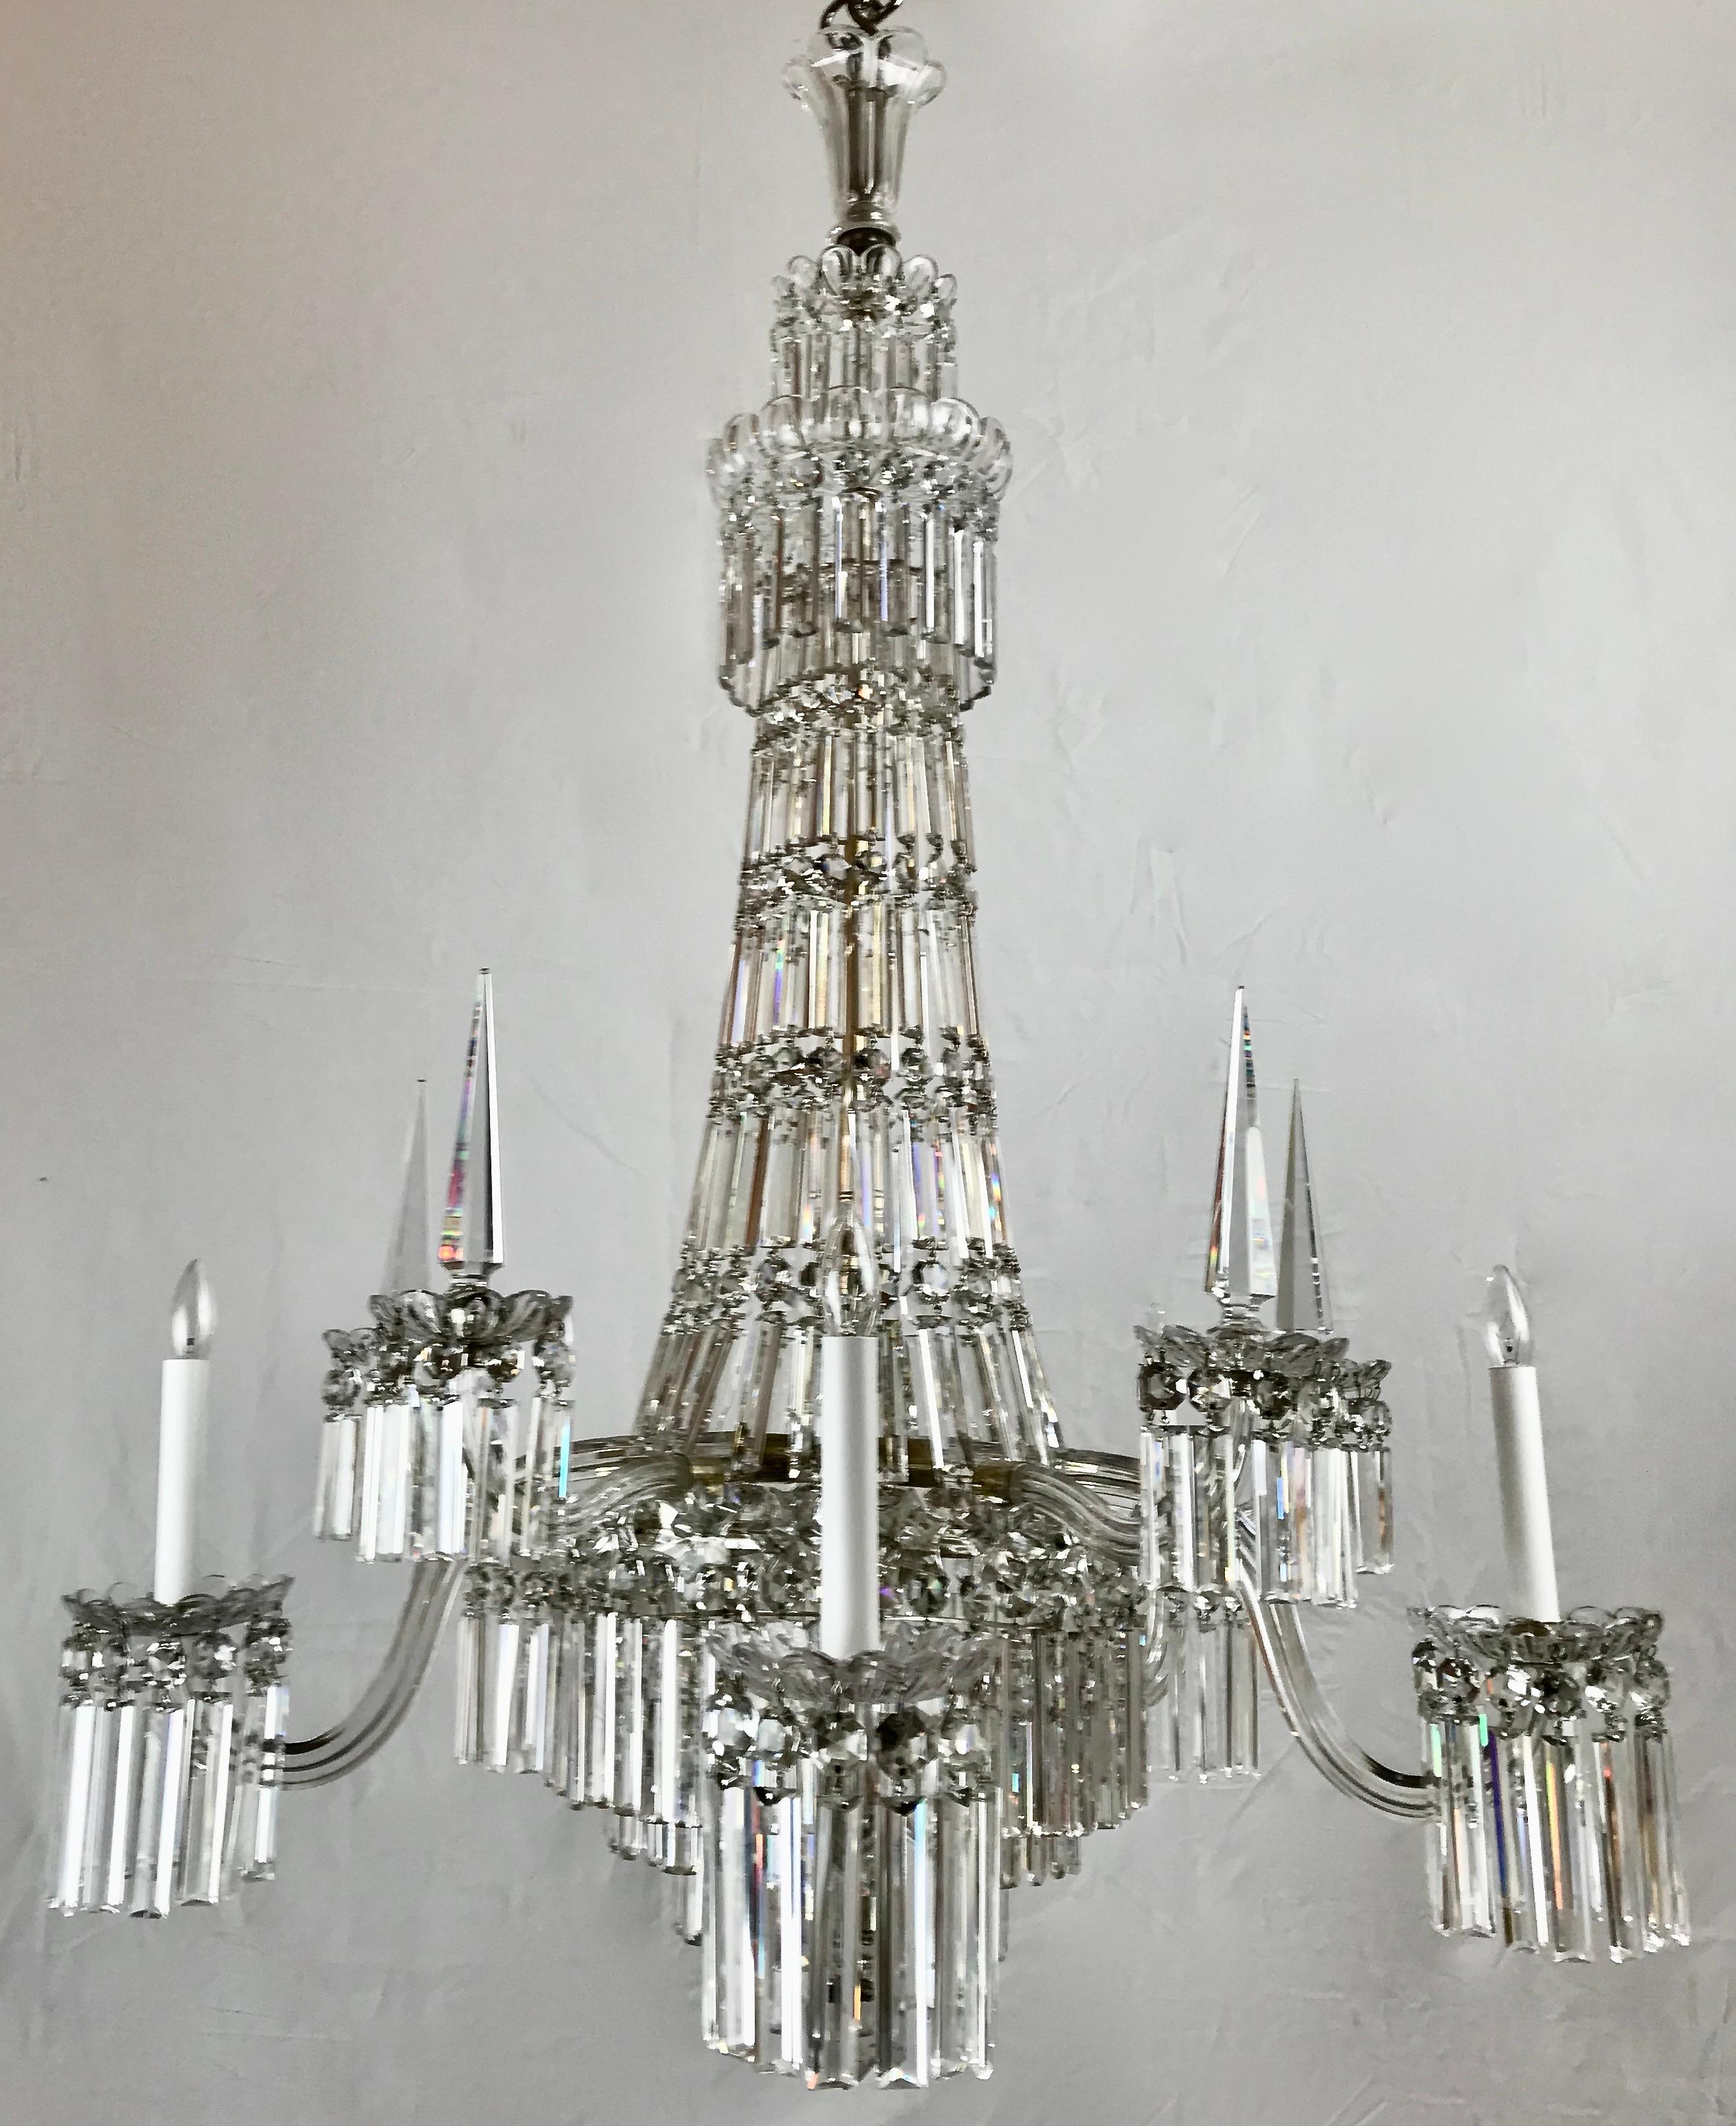  Mid 19th Century Crystal Chandelier by F&C Osler of Tent and Waterfall Design In Good Condition For Sale In Pittsburgh, PA